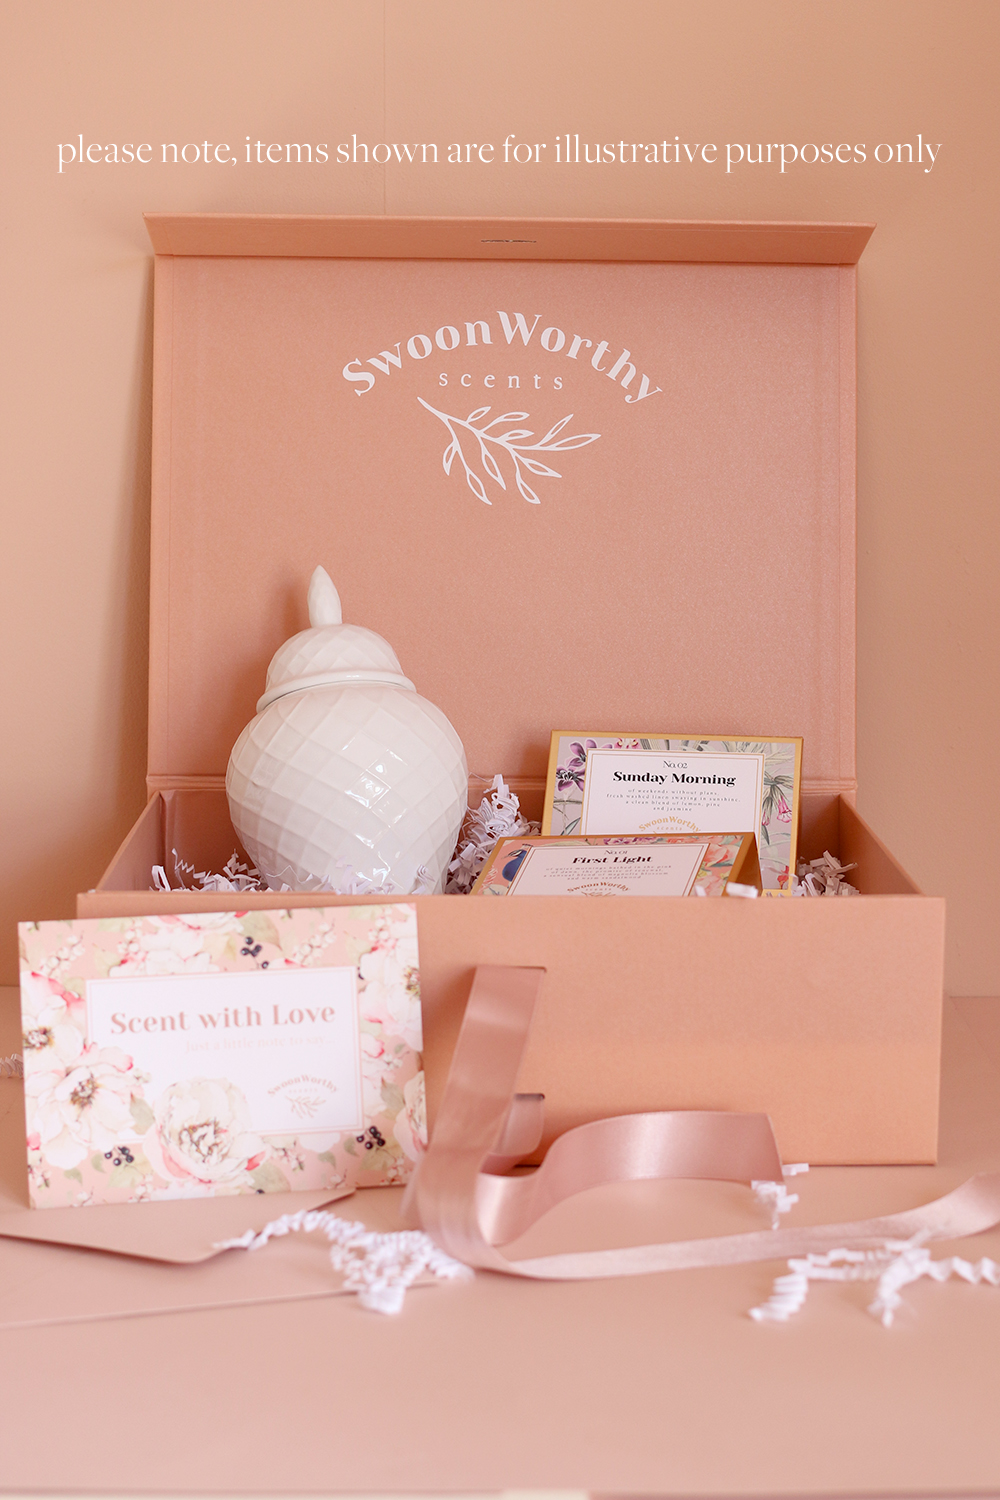 Swoon Worthy Scents large luxury gift box